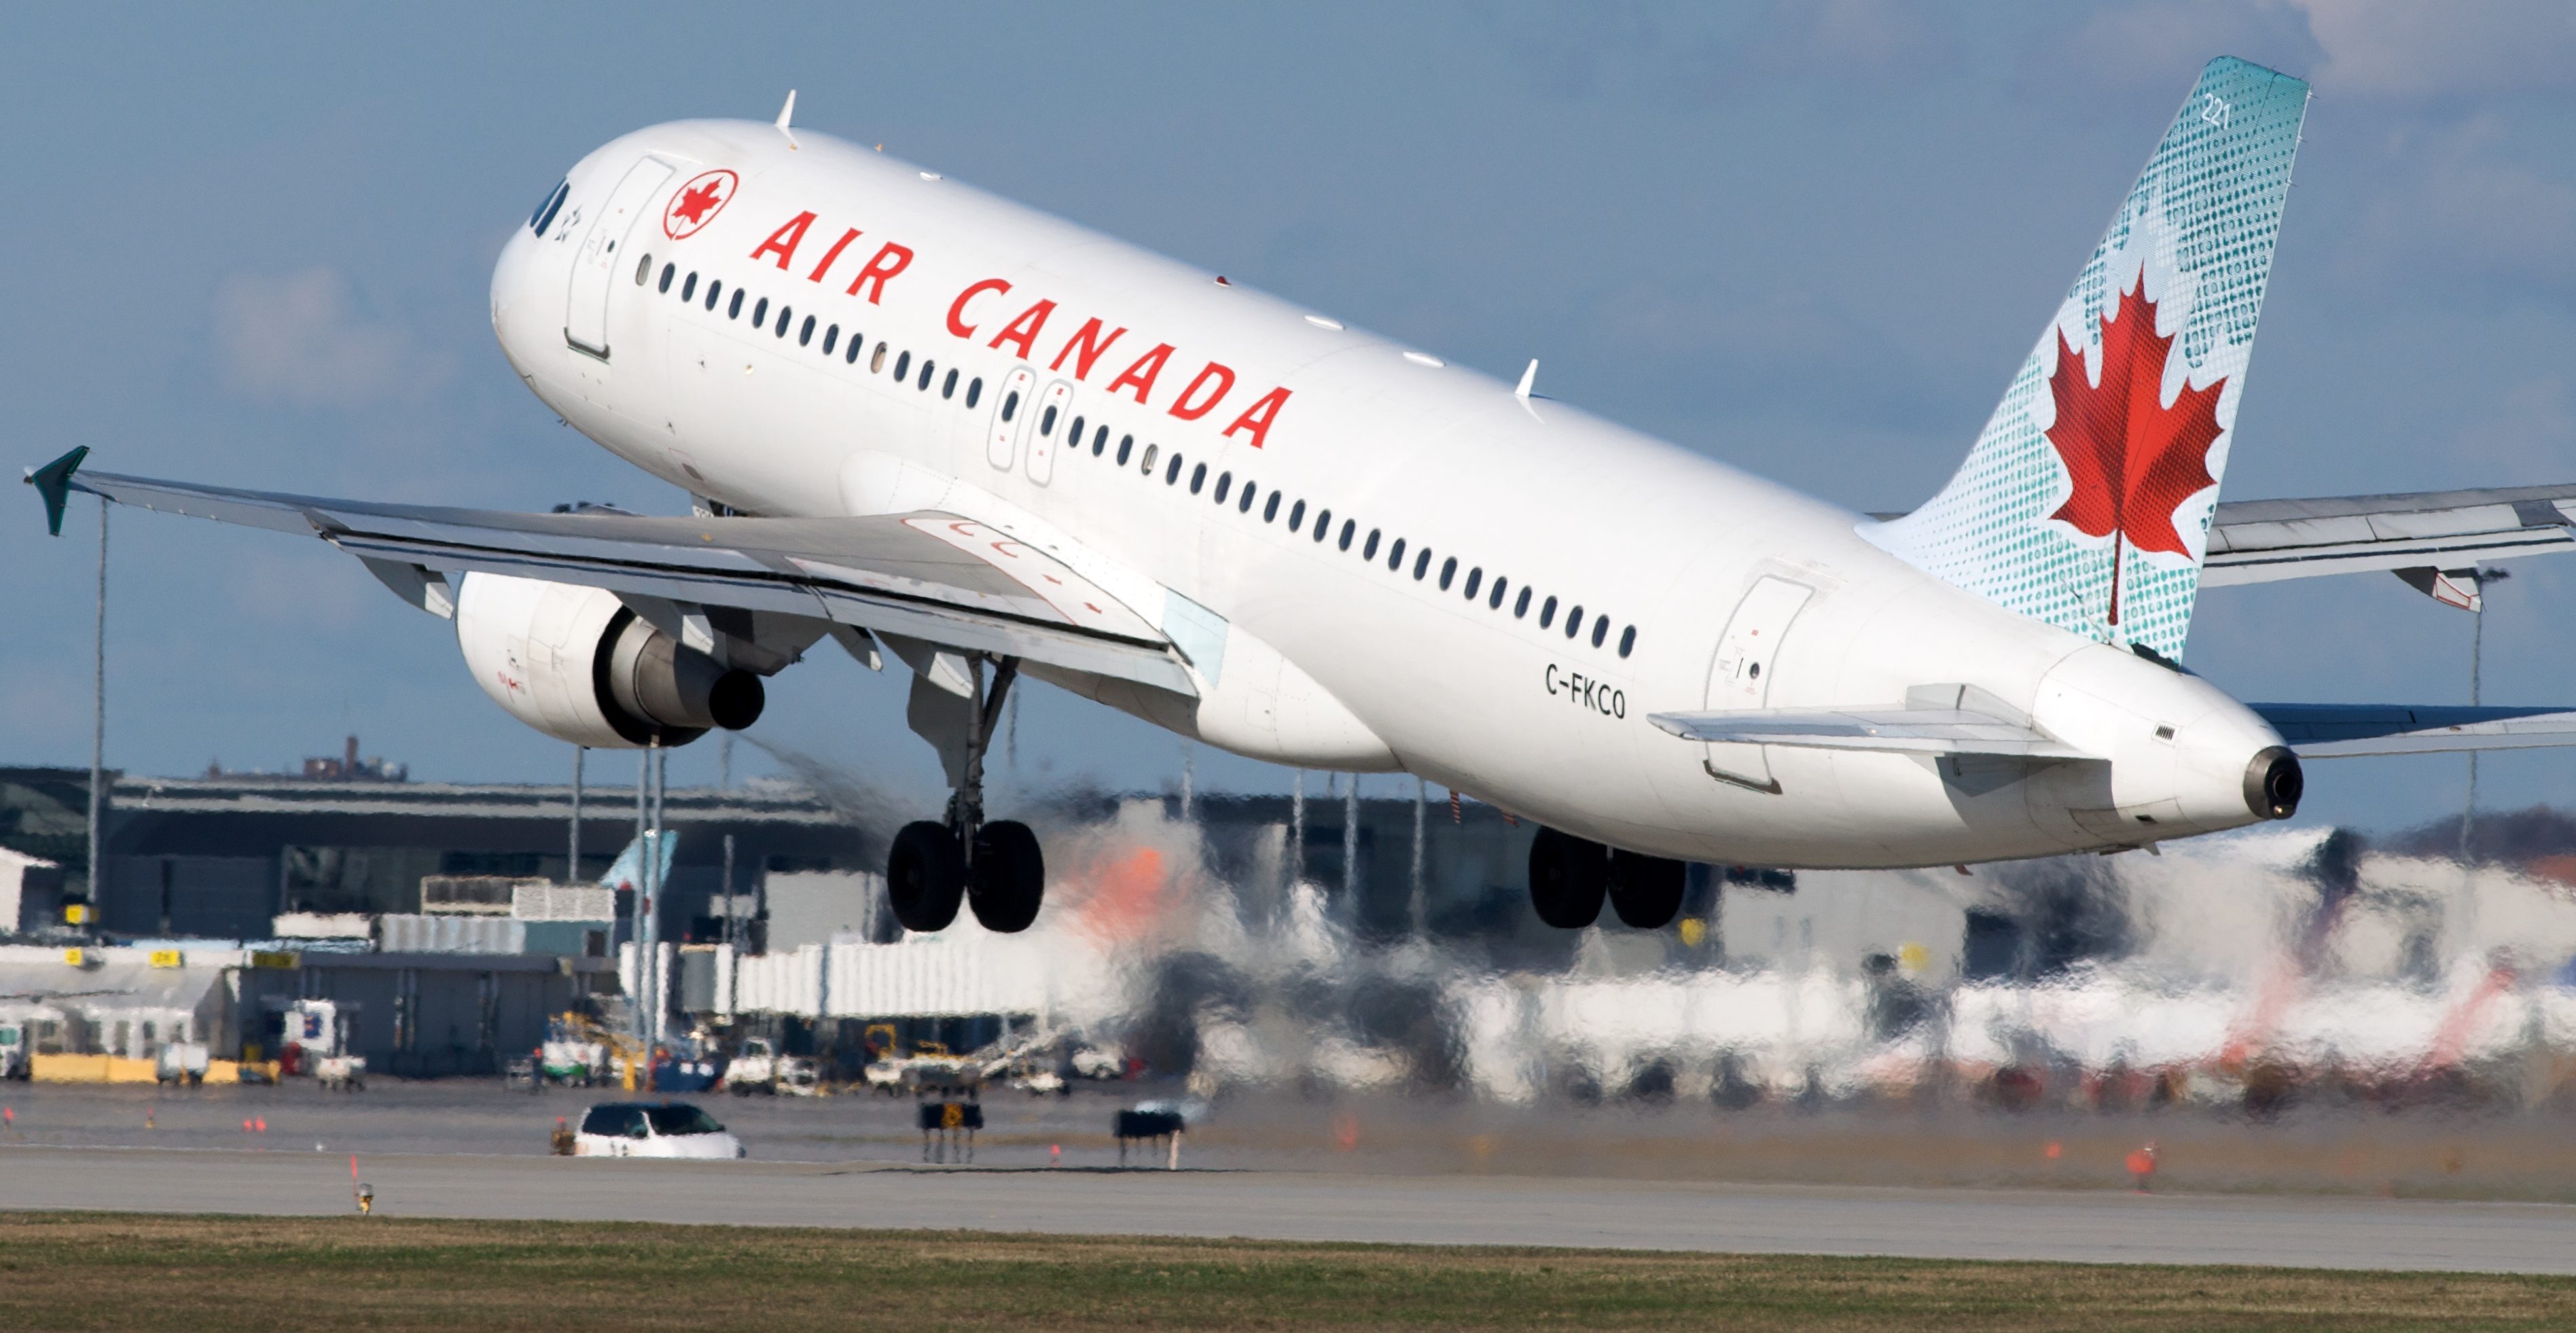 Air Canada Is Adding a Fee on EDIFACT Bookings Starting June 14th